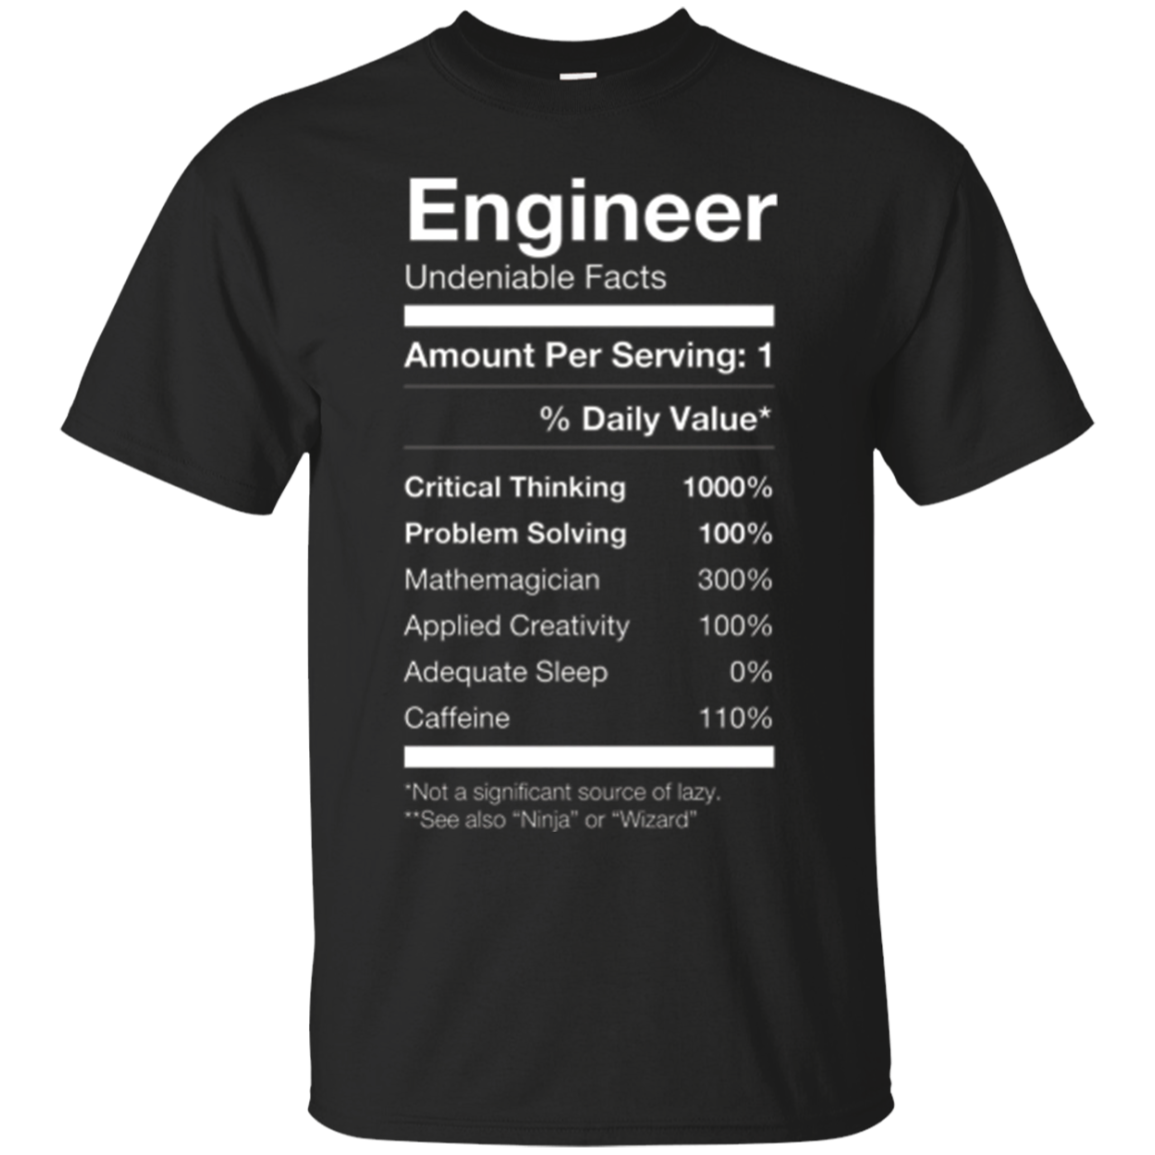 Engineer Nutritional Facts Label Shirt, Funny Cute Gag Gift